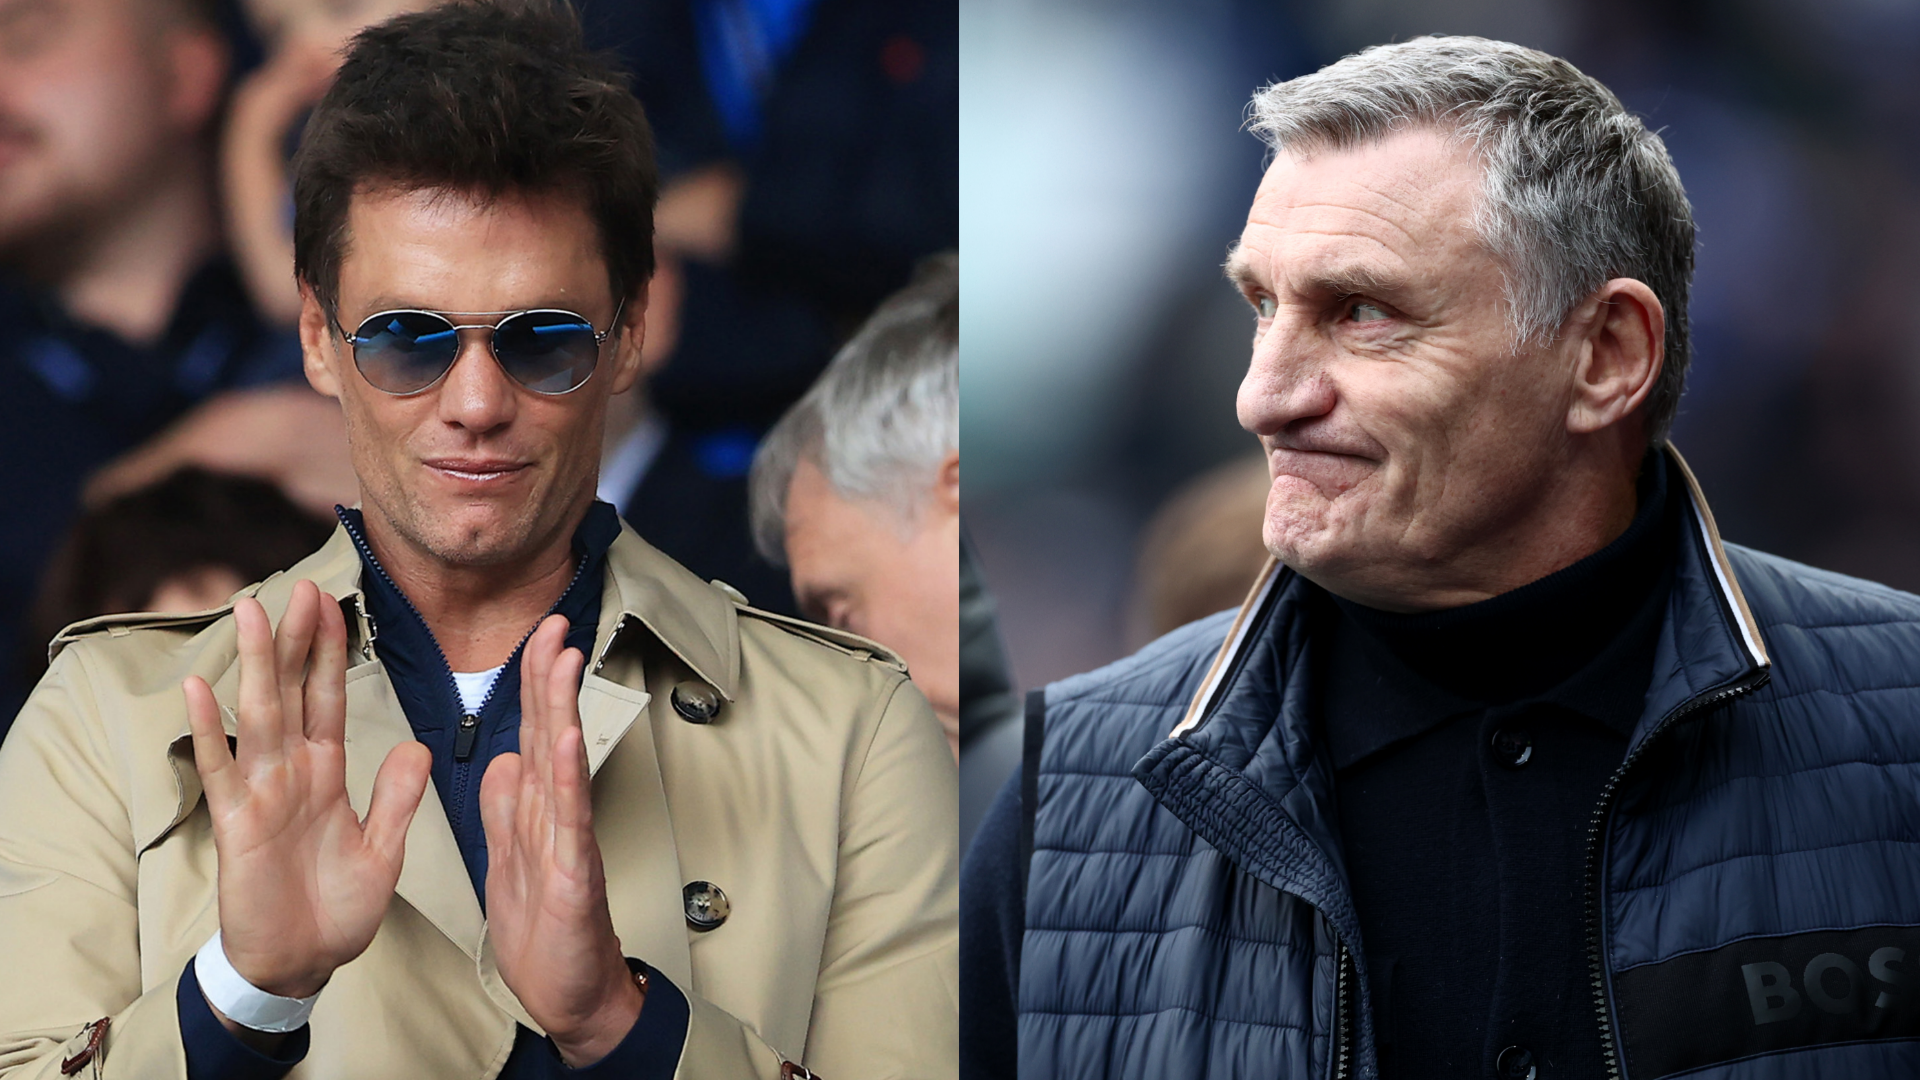 Who wants to be on Birmingham’s ‘journey’ with Tom Brady? Tony Mowbray sends exit warning to underperforming Blues